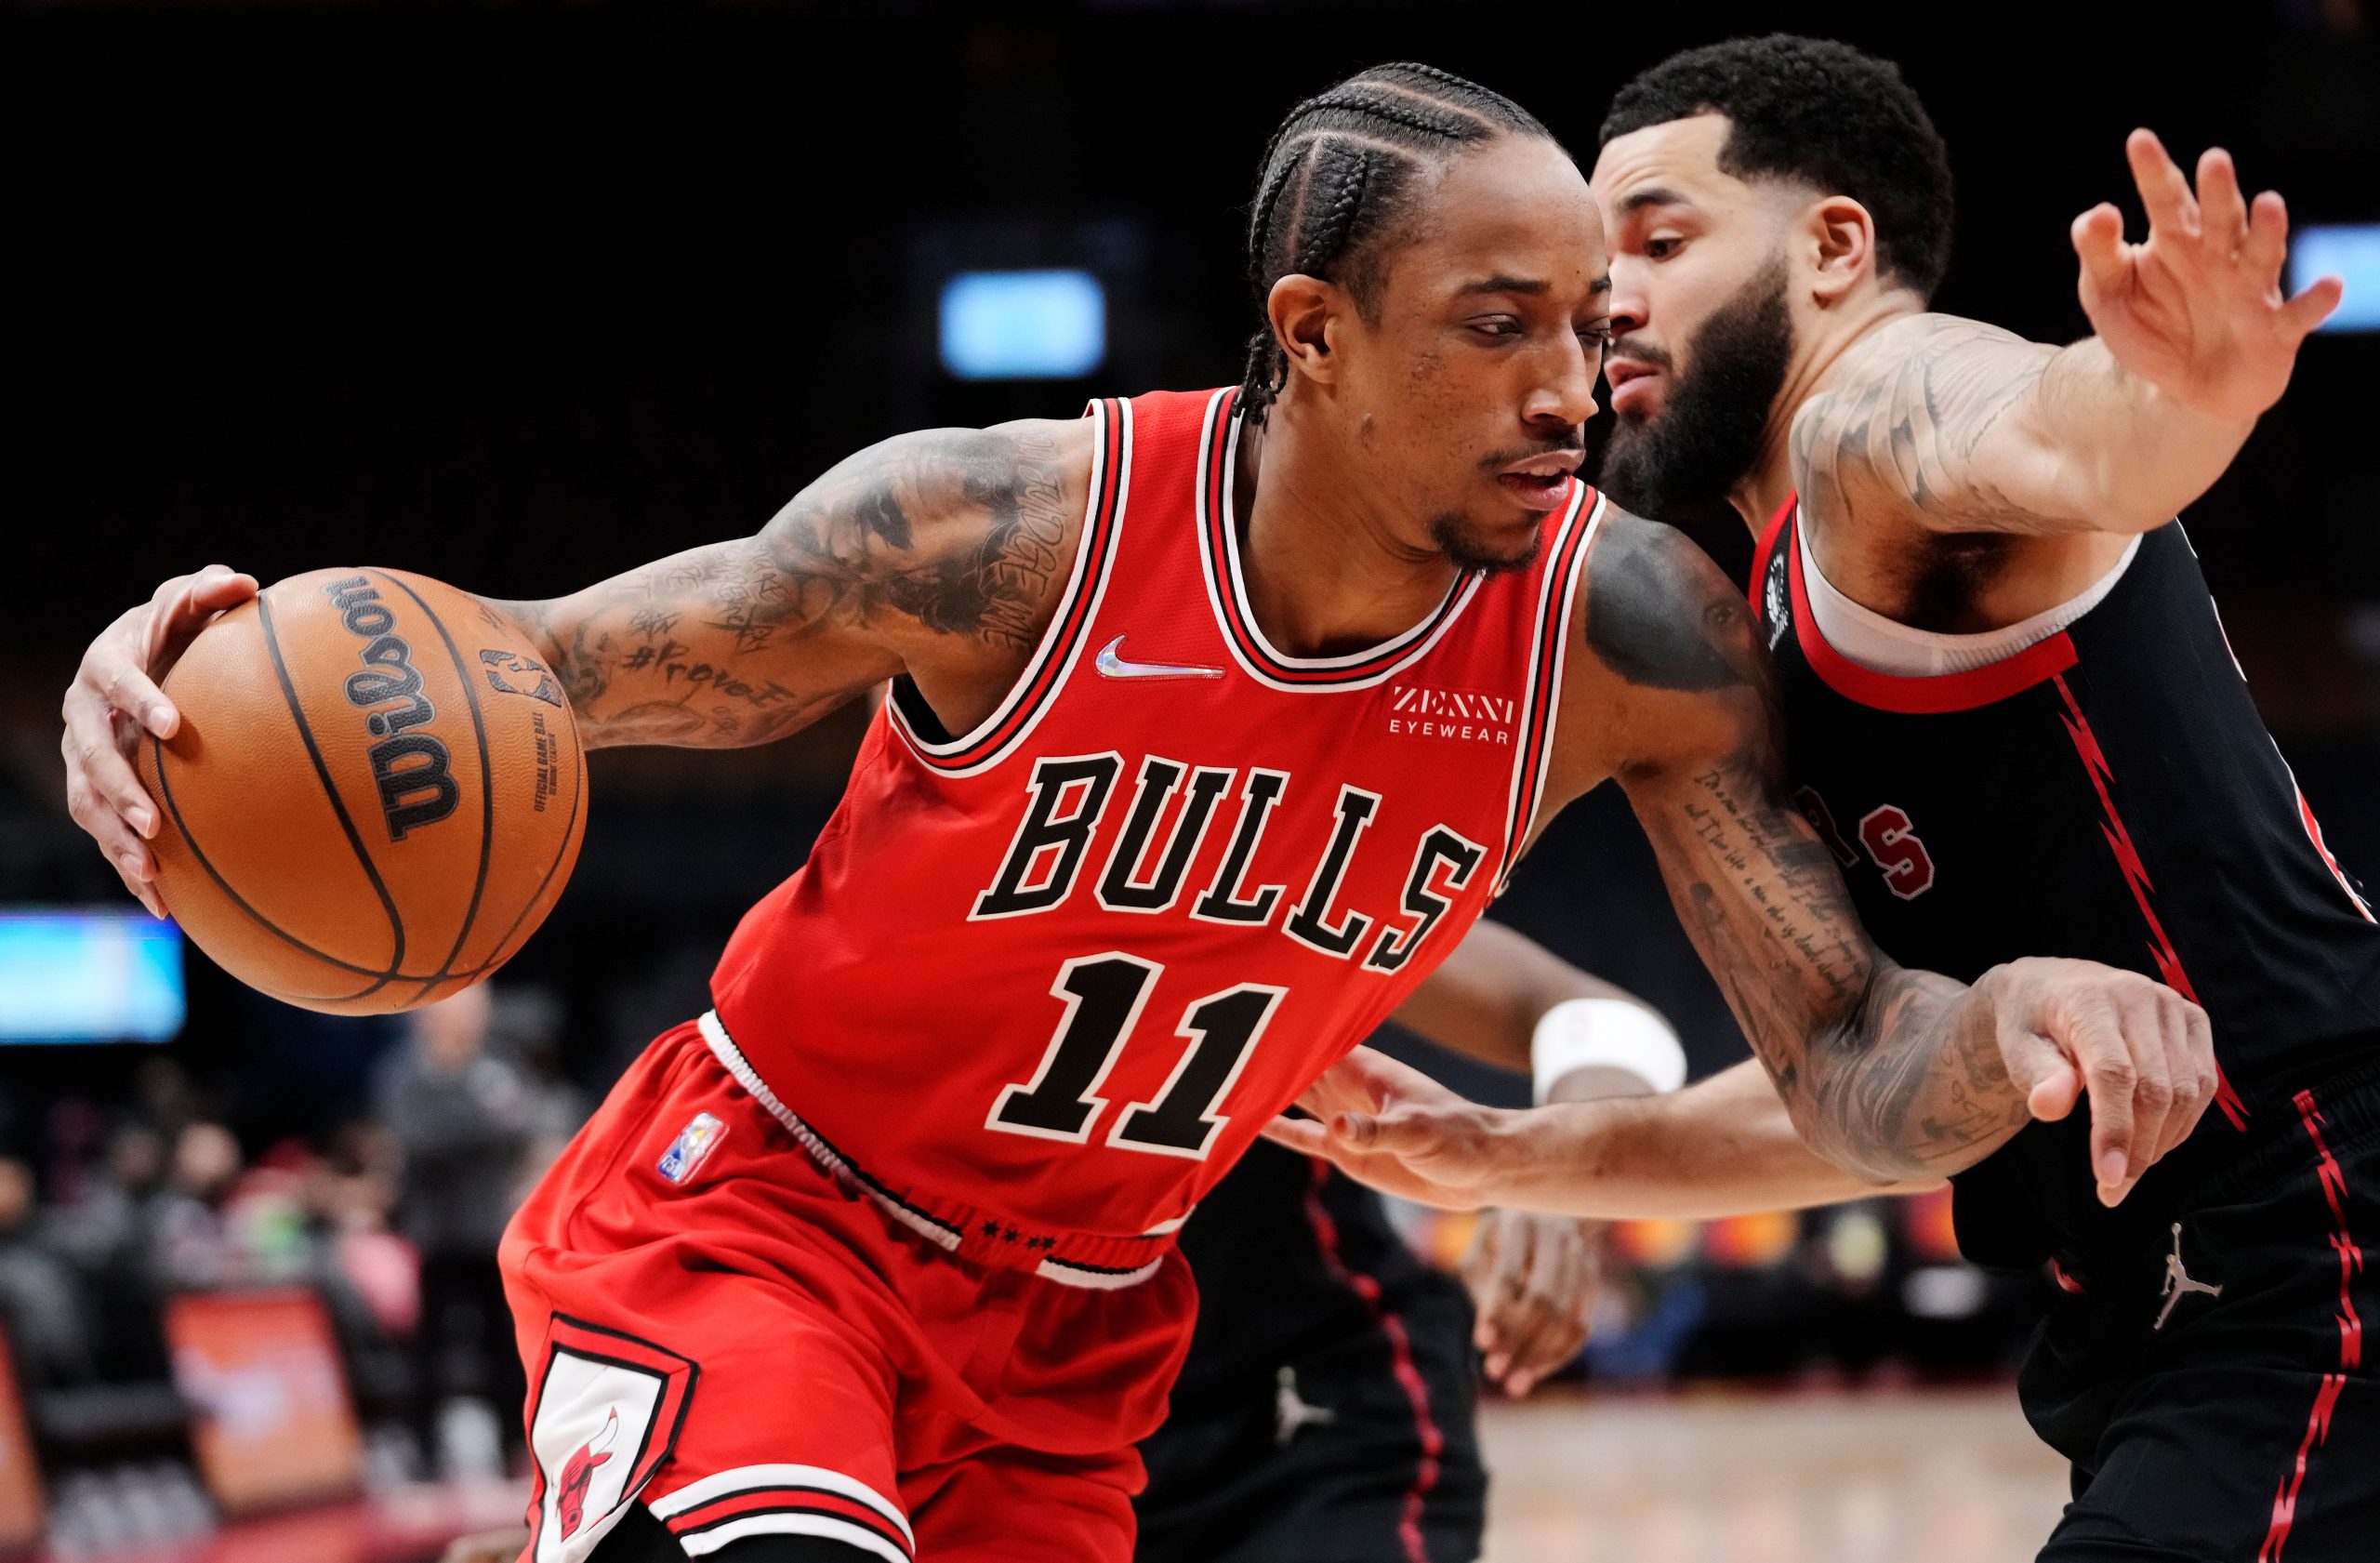 Toronto Raptors beat Chicago Bulls 127-120, Pascal Siakam scores 25 points and 13 rebounds